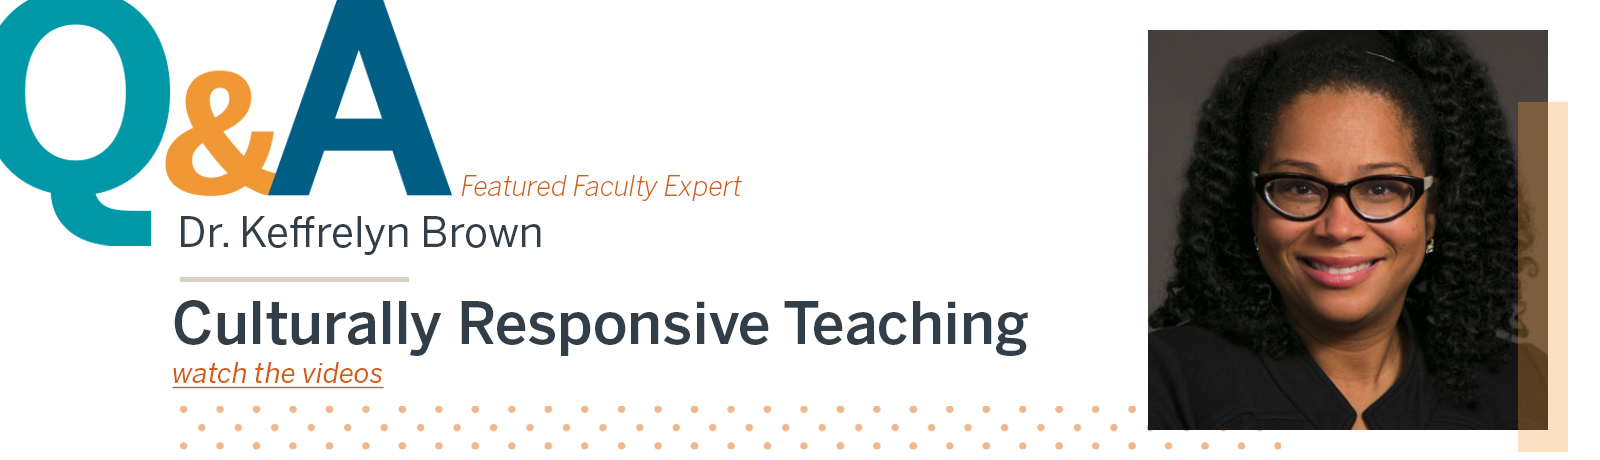 Featured Faculty Expert Q&A with Keffrelyn Brown on Culturally Responsive Teaching - Watch the videos